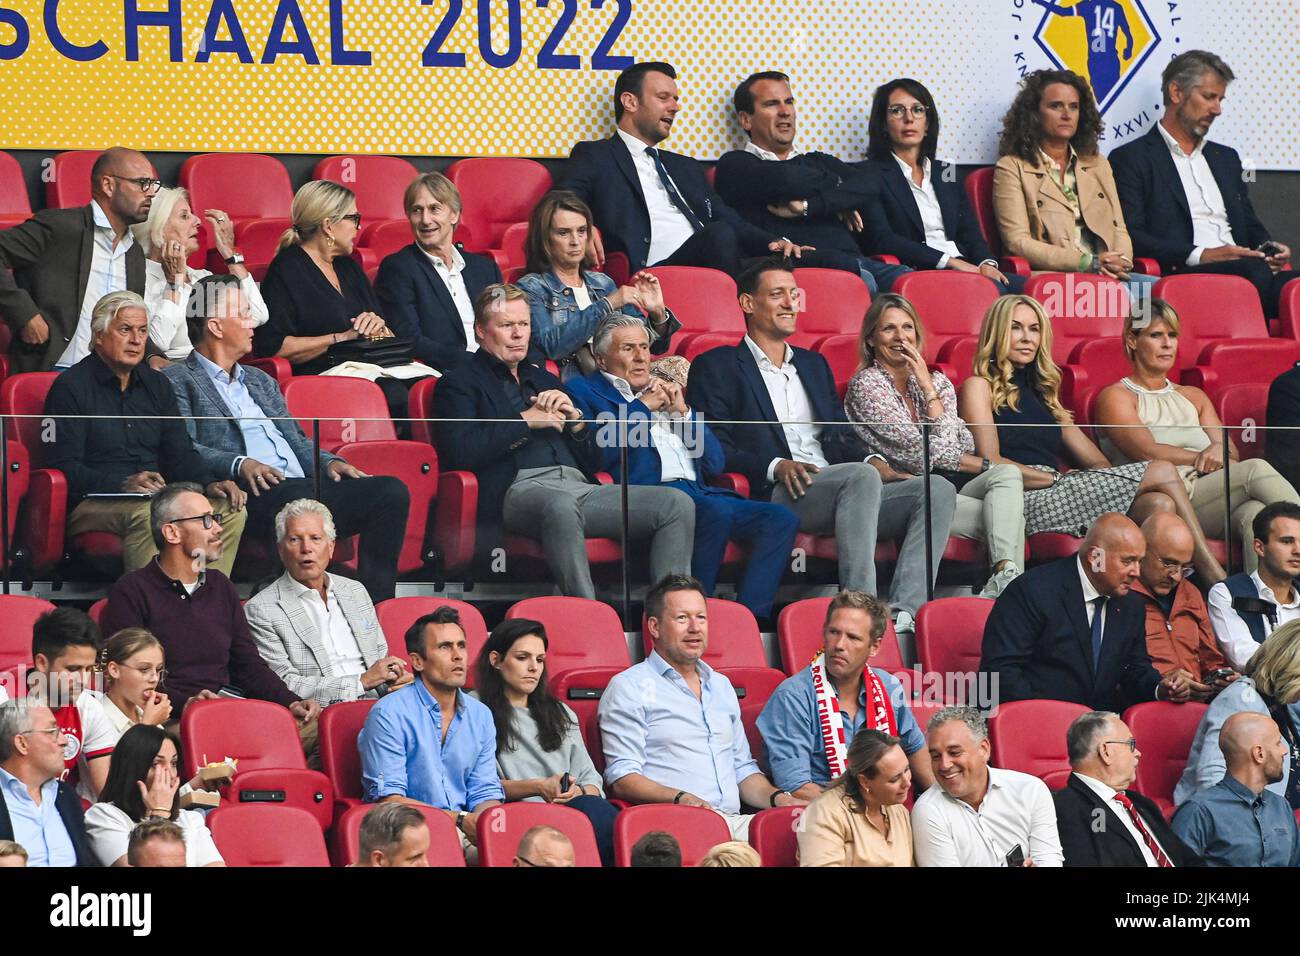 AMSTERDAM - Louis van Gaal, Marianne van Leeuwen, Ronald Koeman and Marcel Bout among others in the stands during the Johan Cruyff scale match between Ajax Amsterdam and PSV Eindhoven at the Johan Cruijff Arena on July 30, 2022 in Amsterdam, Netherlands. ANP OLAF KRAAK Stock Photo